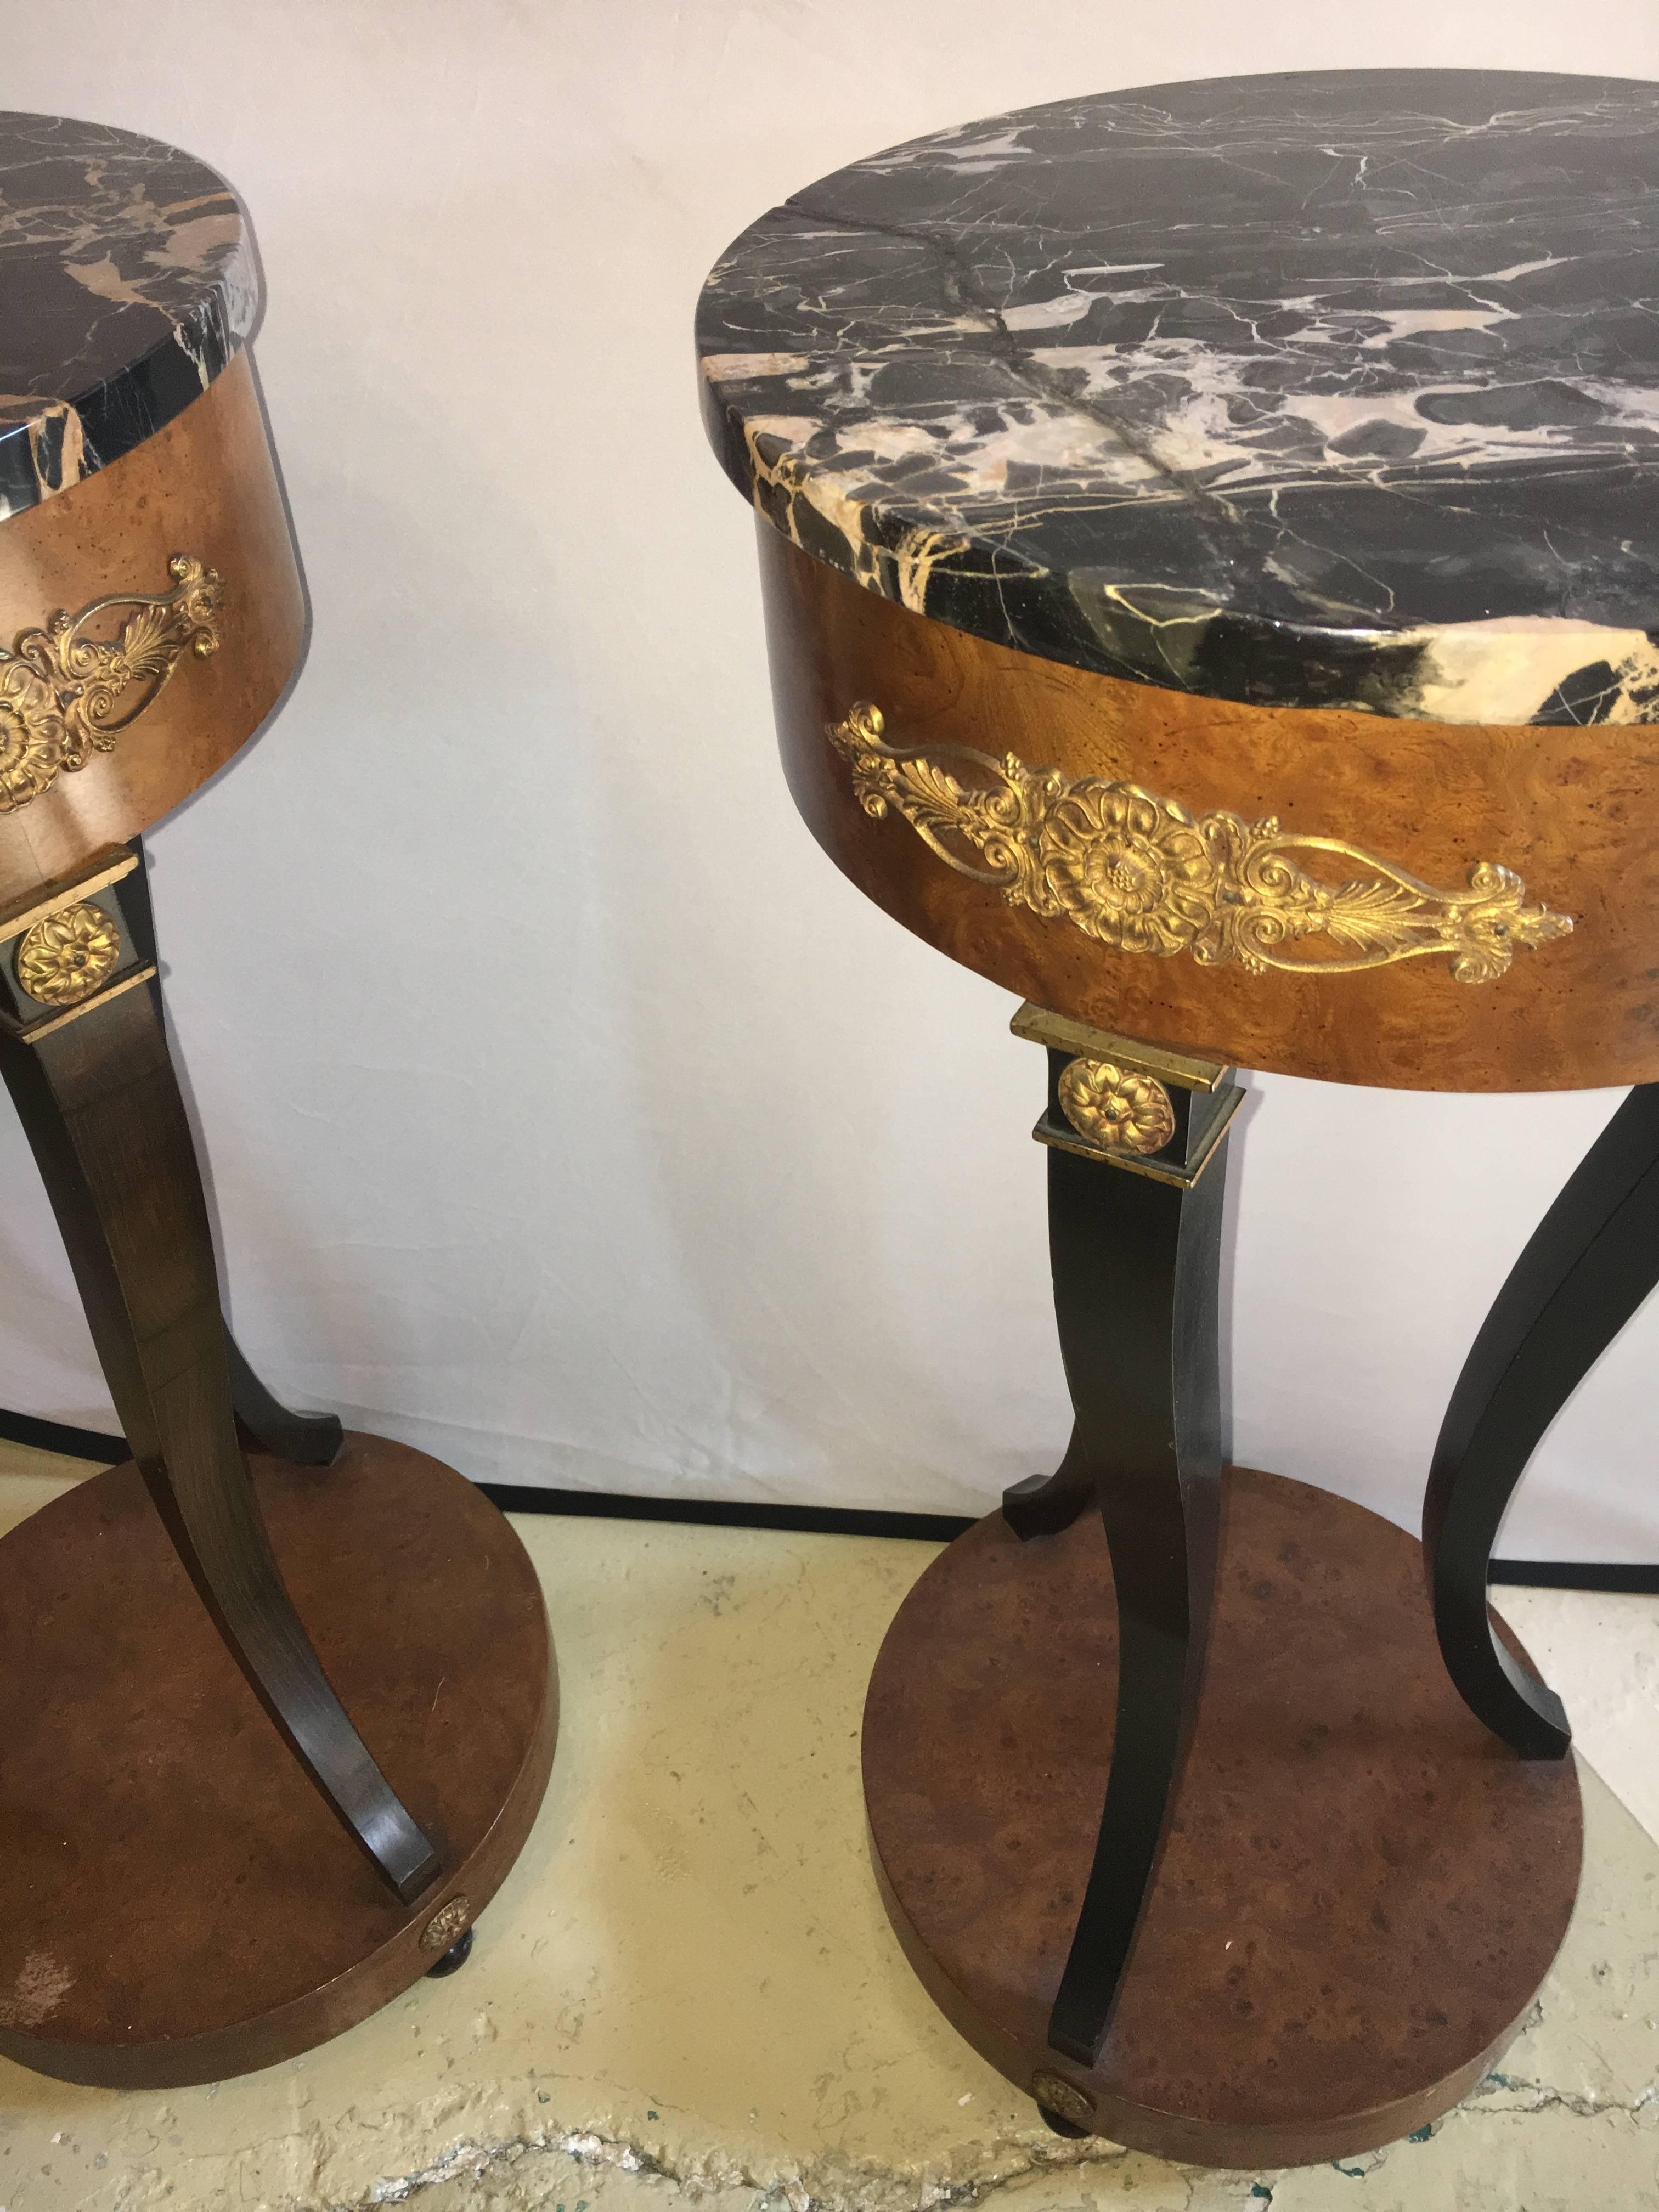 Pair of Empire style marble top pedestals. Each with bronze mounts. Ebony and burl wood decorated sitting on small ebony bun feet. Very decorative.